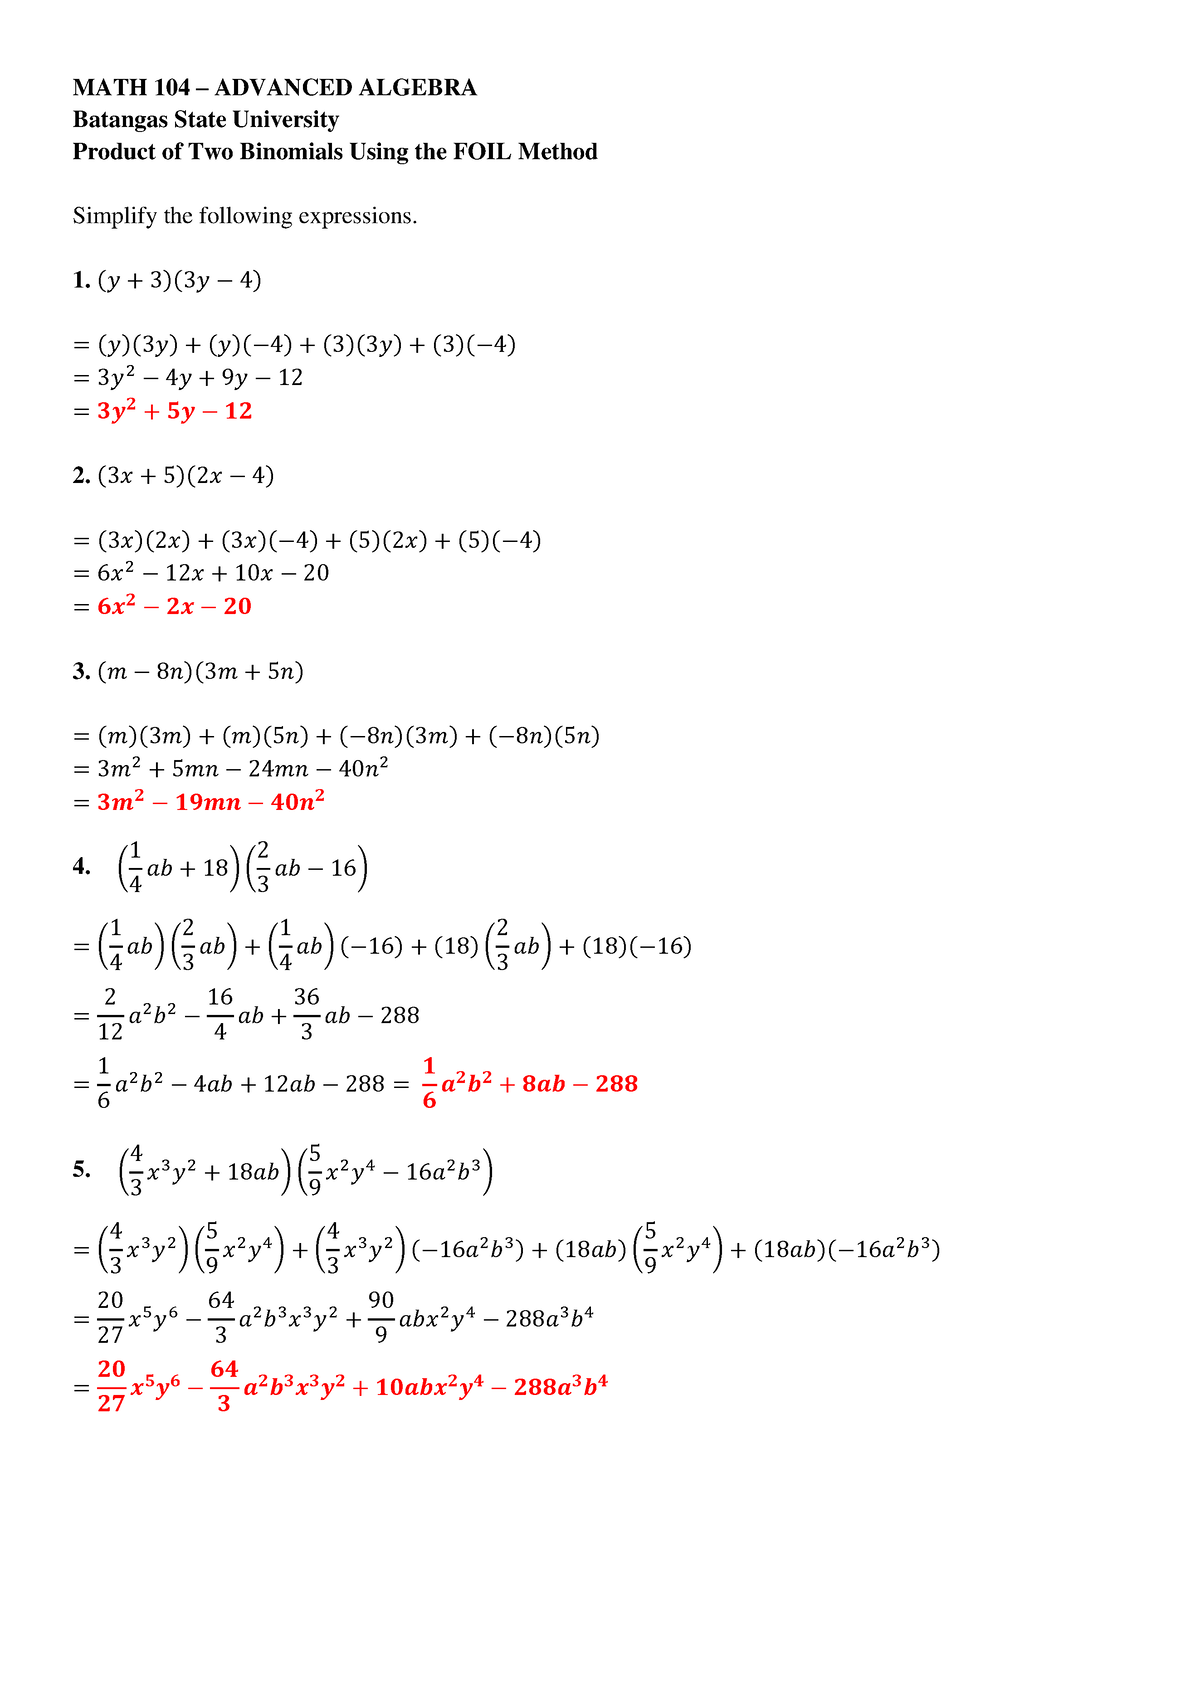 product-of-two-binomials-using-the-foil-method-math-104-advanced